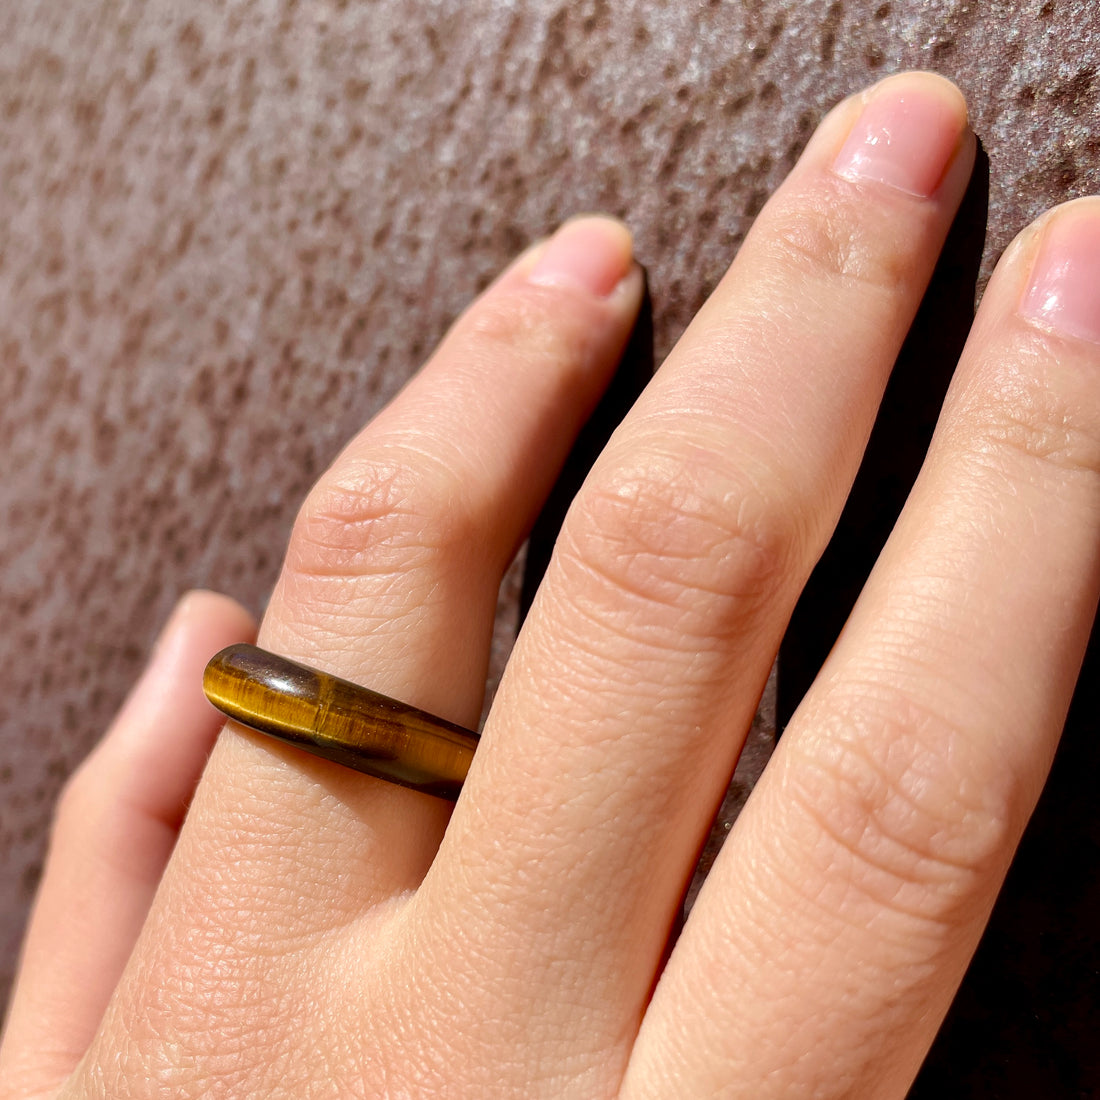 toltec tiger eye stone band ring from whitestone jewelry co. maya collection